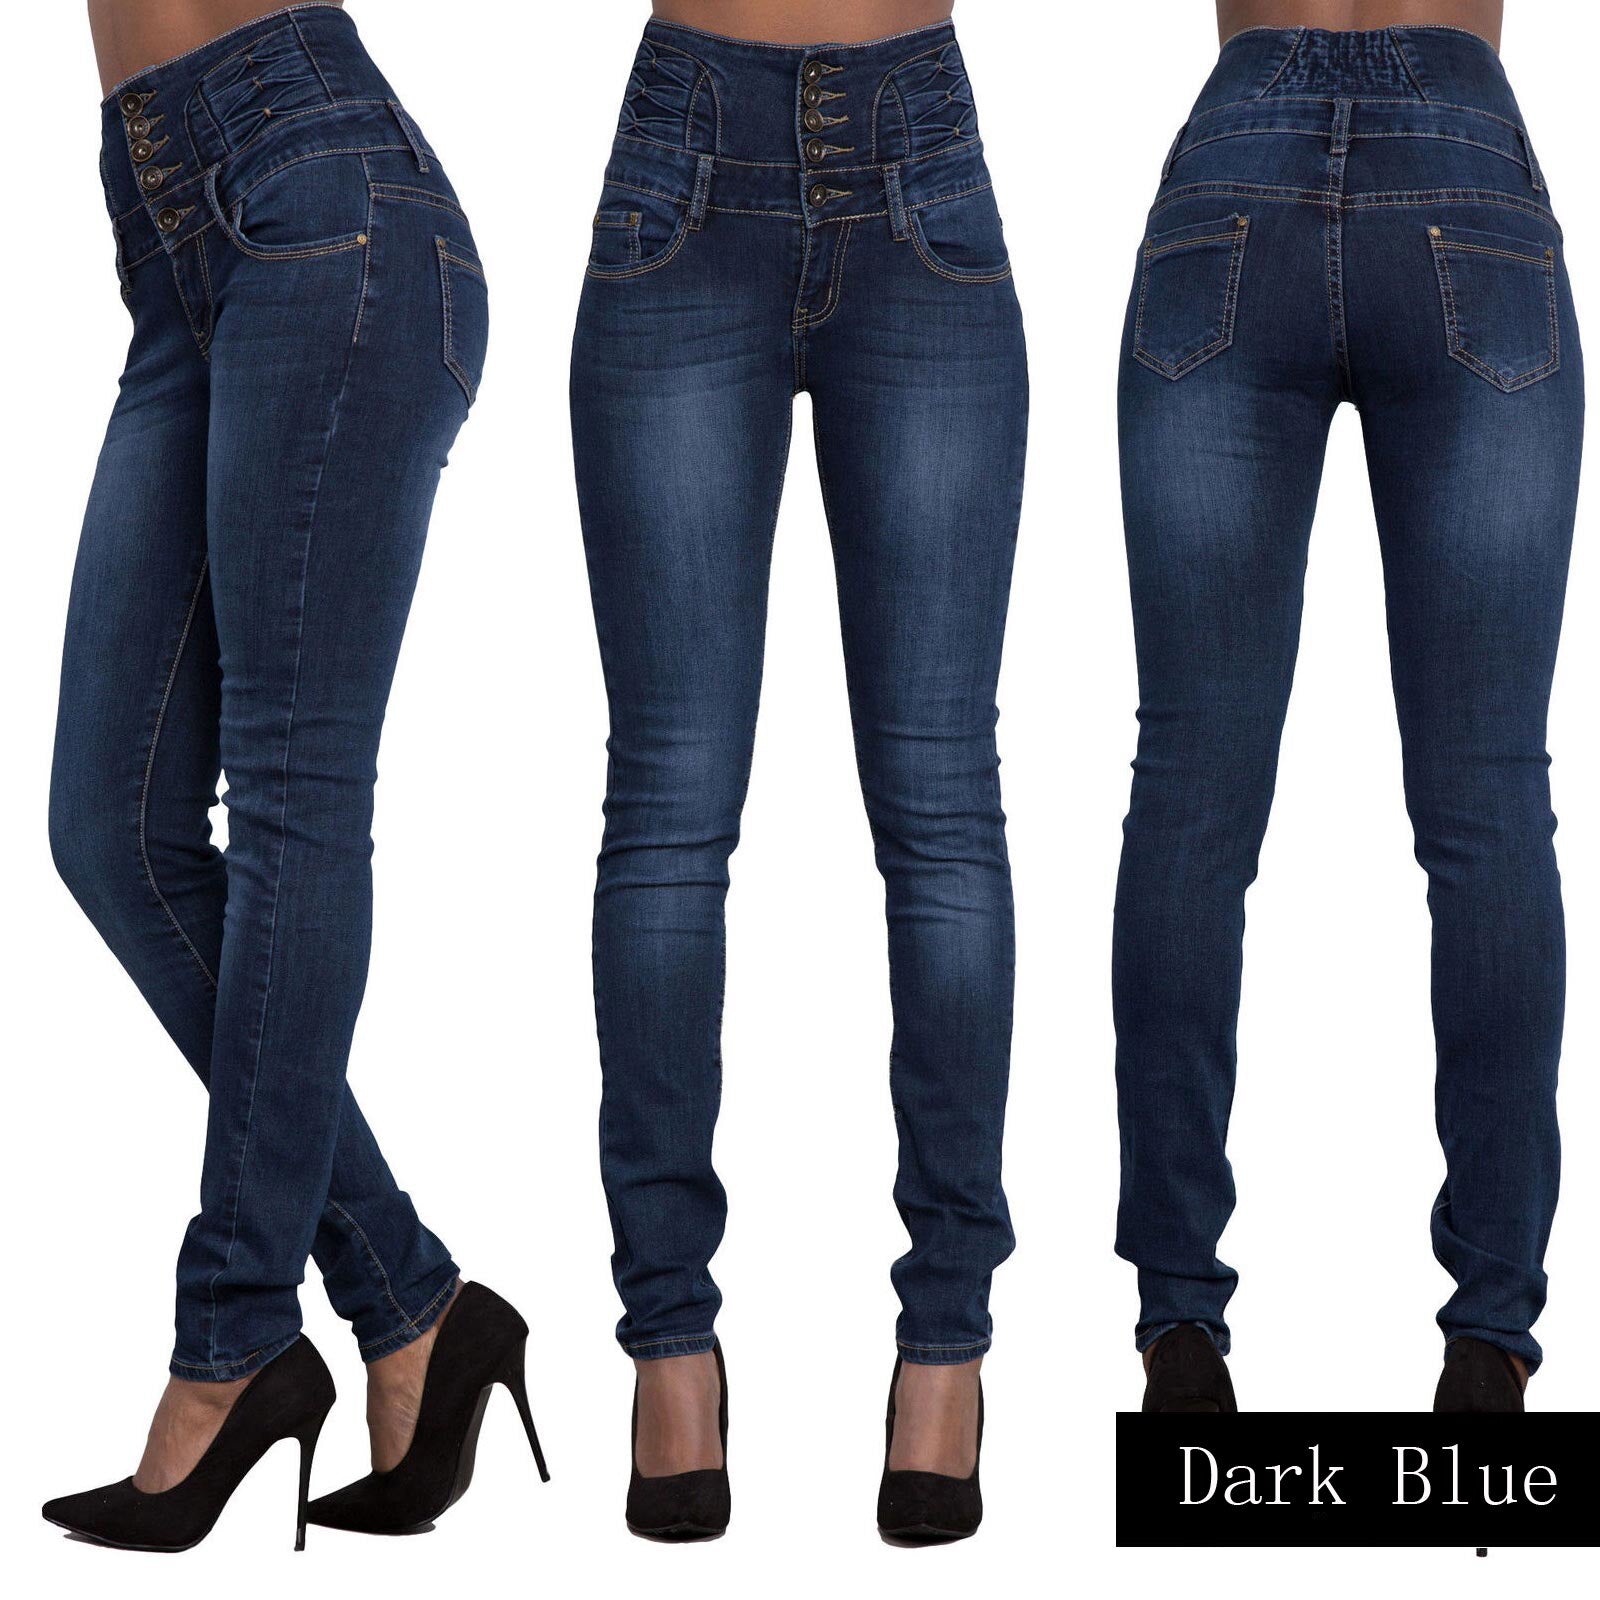 Skinny High Waist Jeans - 200000361 Blue / S / United States Find Epic Store